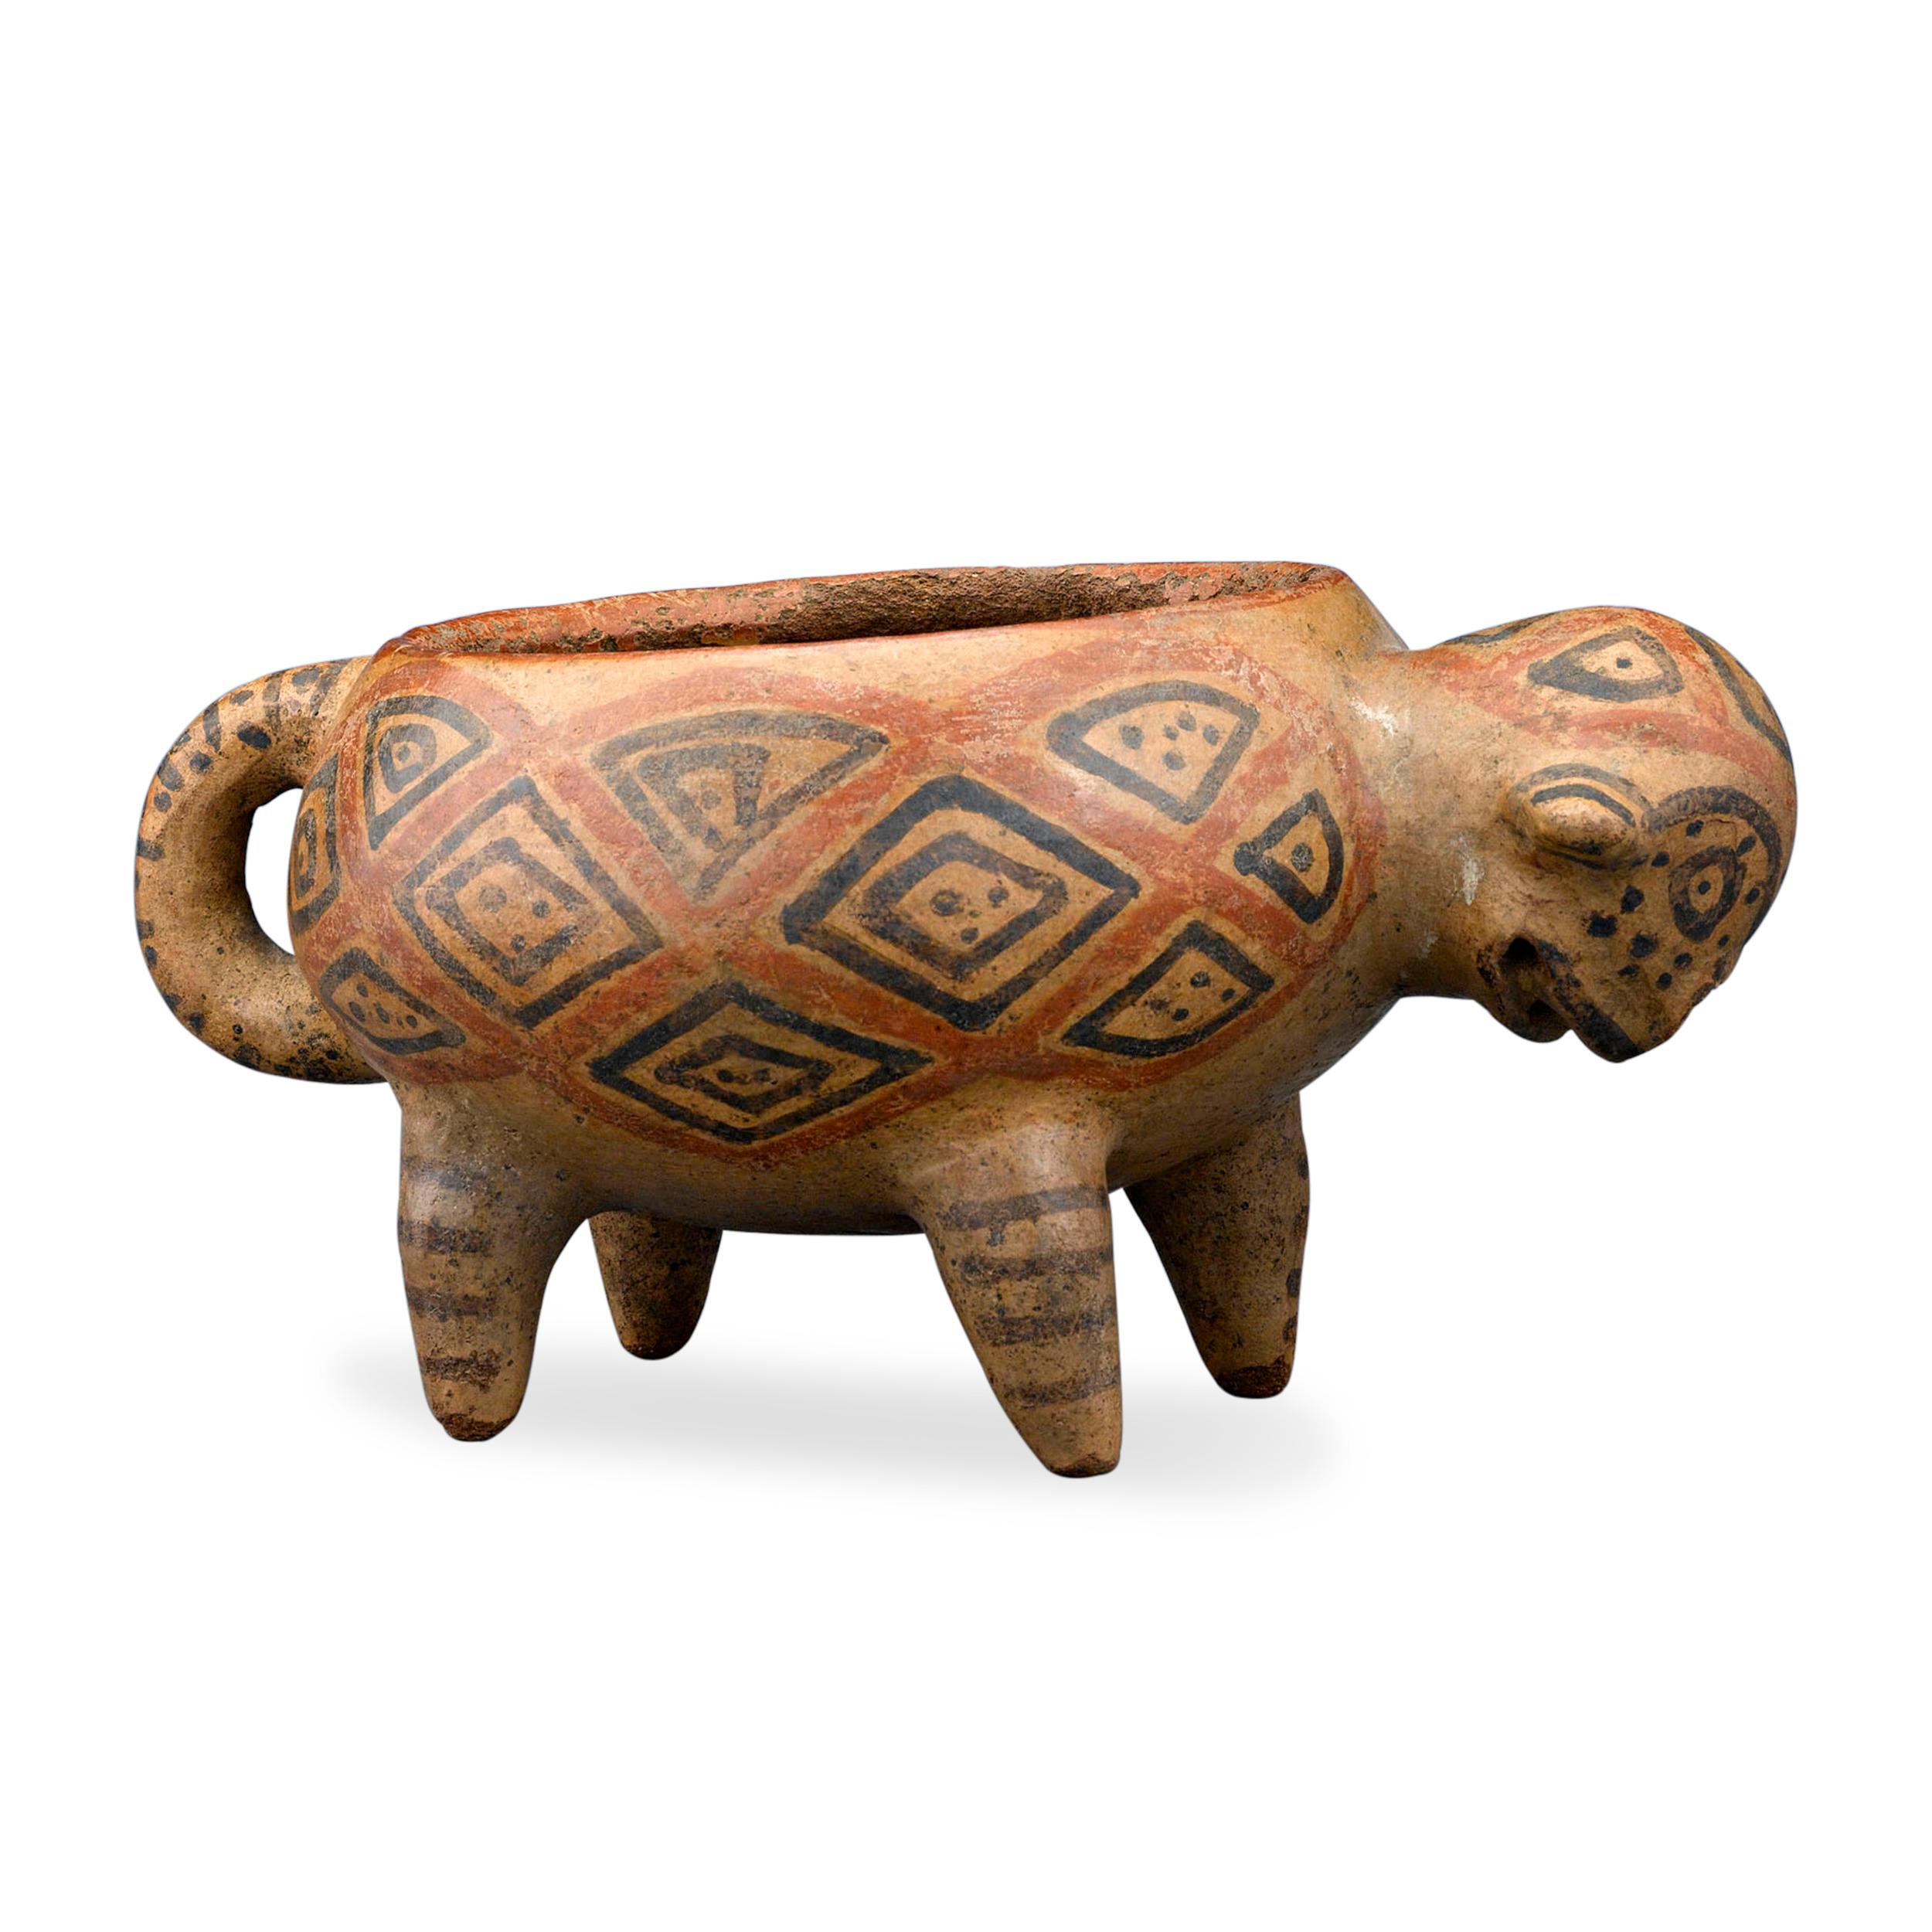 This exceptional Pre-Columbian vessel from the Diquís culture of present-day Costa Rica takes the form of a jaguar. A symbol of strength and power, the jaguar represented the hunter, killer and warrior, while the jaguar god was believed to have